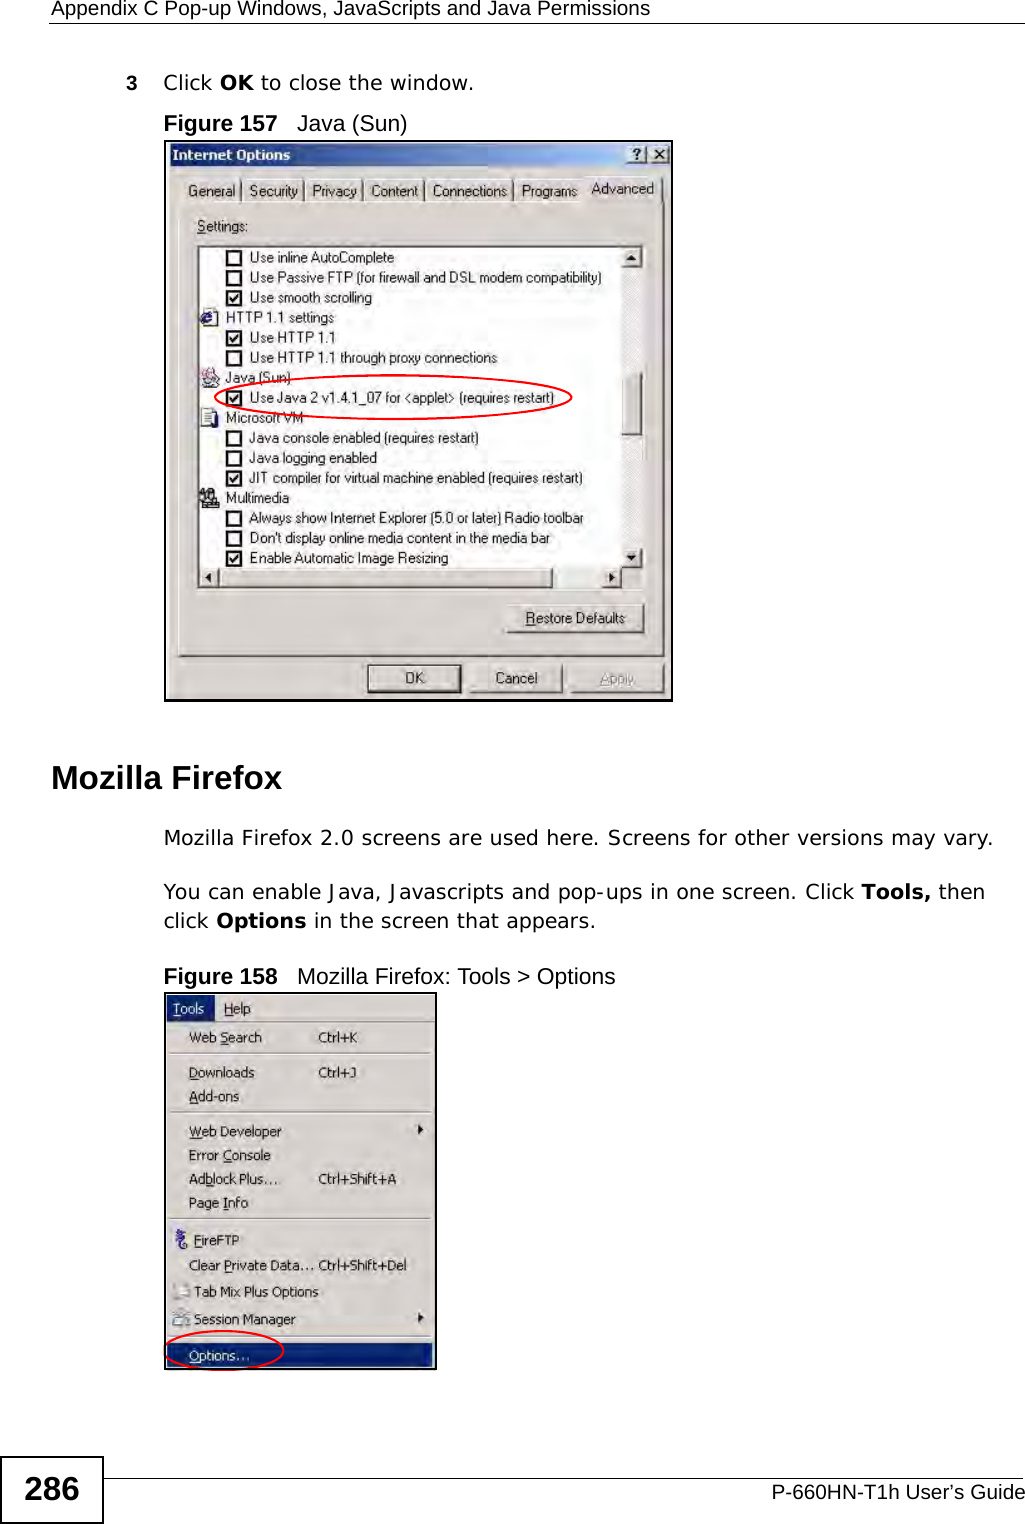 Appendix C Pop-up Windows, JavaScripts and Java PermissionsP-660HN-T1h User’s Guide2863Click OK to close the window.Figure 157   Java (Sun)Mozilla FirefoxMozilla Firefox 2.0 screens are used here. Screens for other versions may vary. You can enable Java, Javascripts and pop-ups in one screen. Click Tools, then click Options in the screen that appears.Figure 158   Mozilla Firefox: Tools &gt; Options